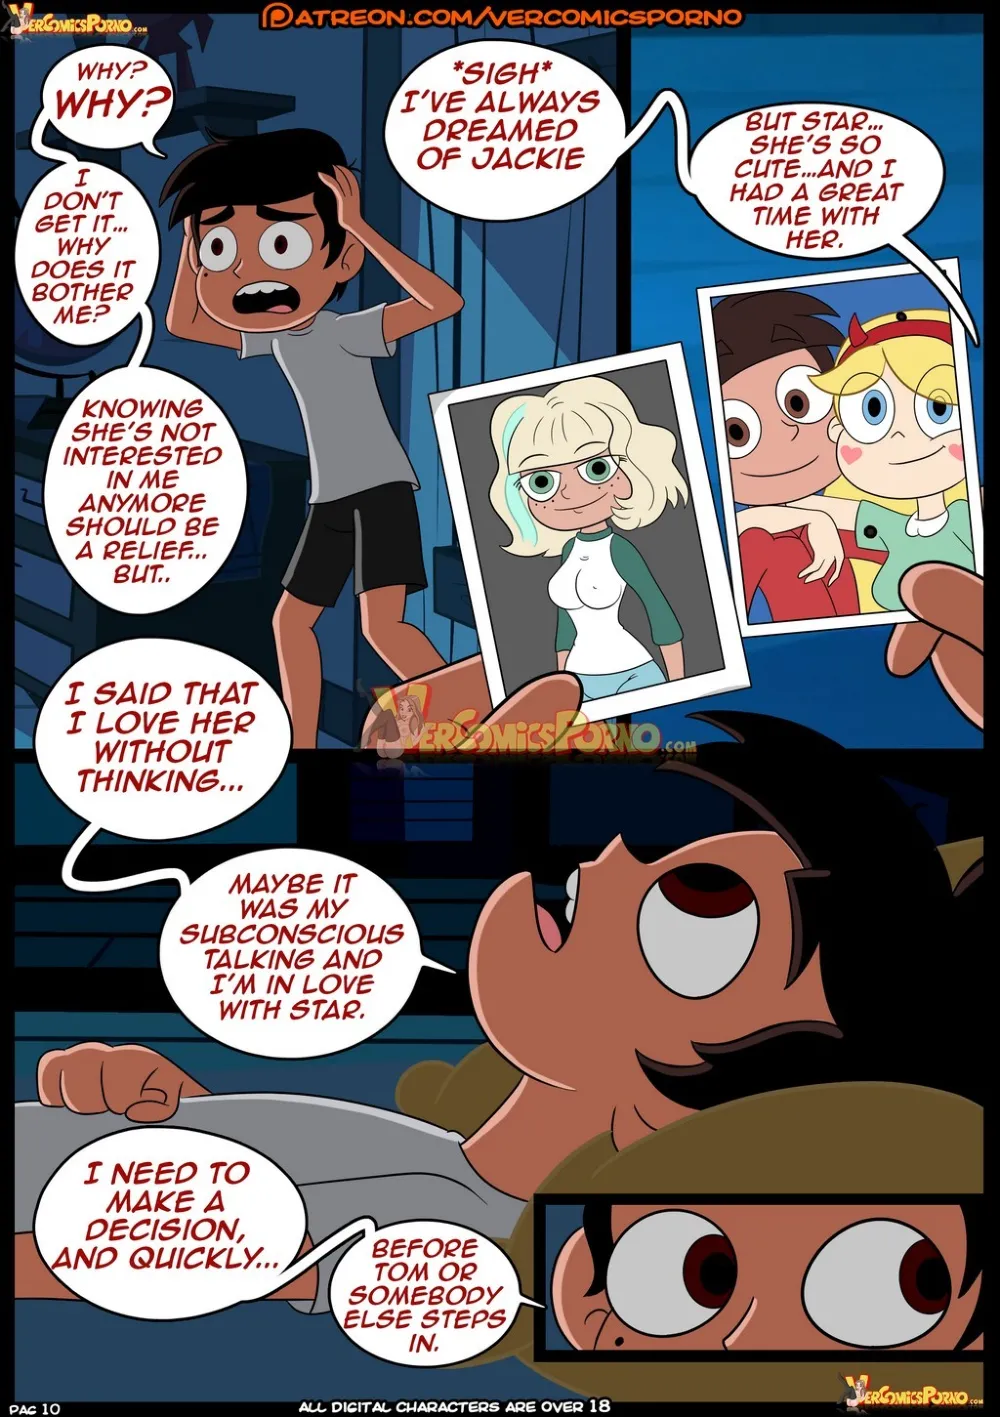 Star Vs. the forces of sex 2 - Page 11